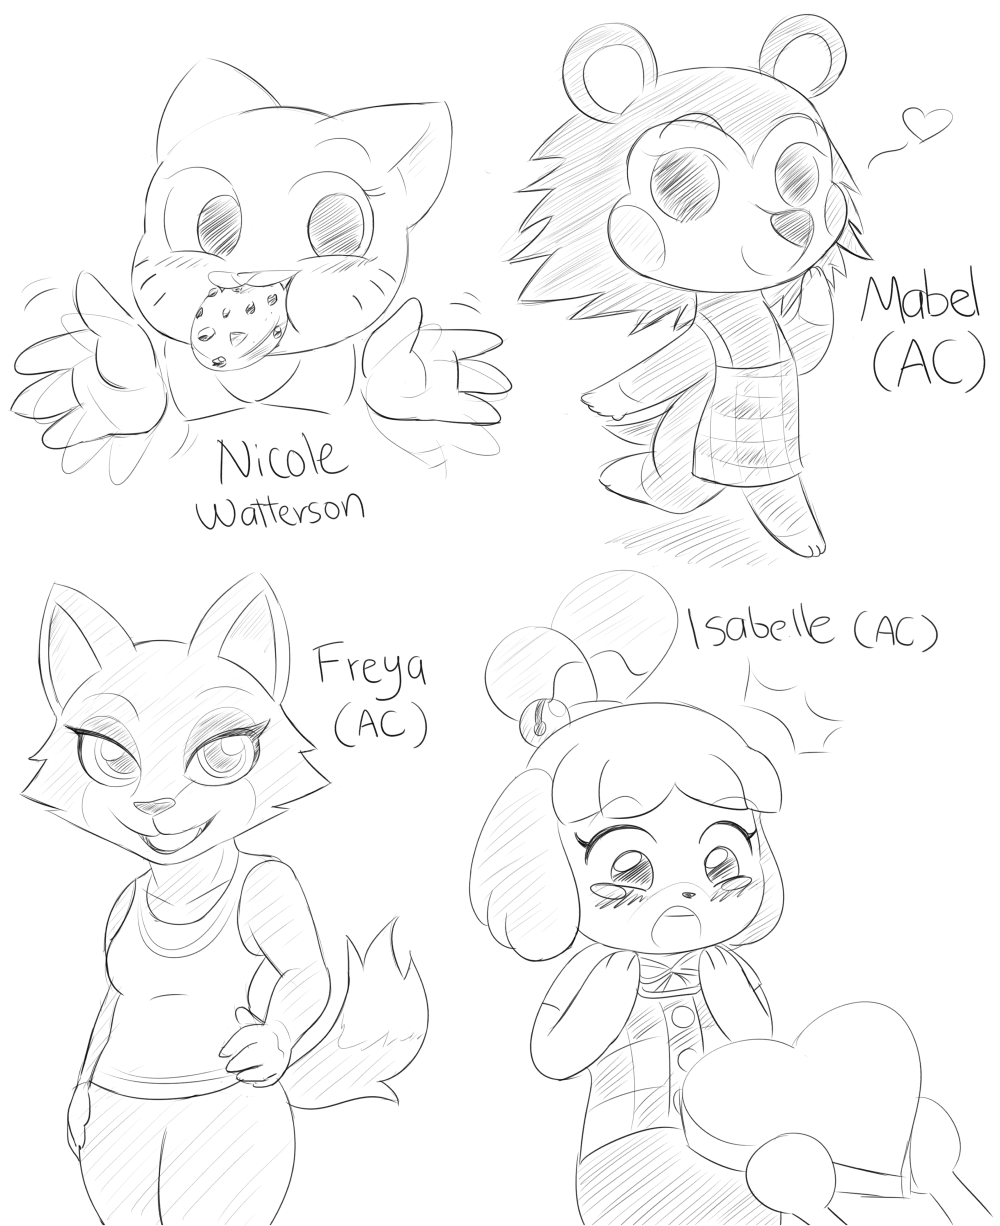 alfa995:  Sketches from today’s stream!Ahhhh Nicole and Isabelle and Doki and Katia